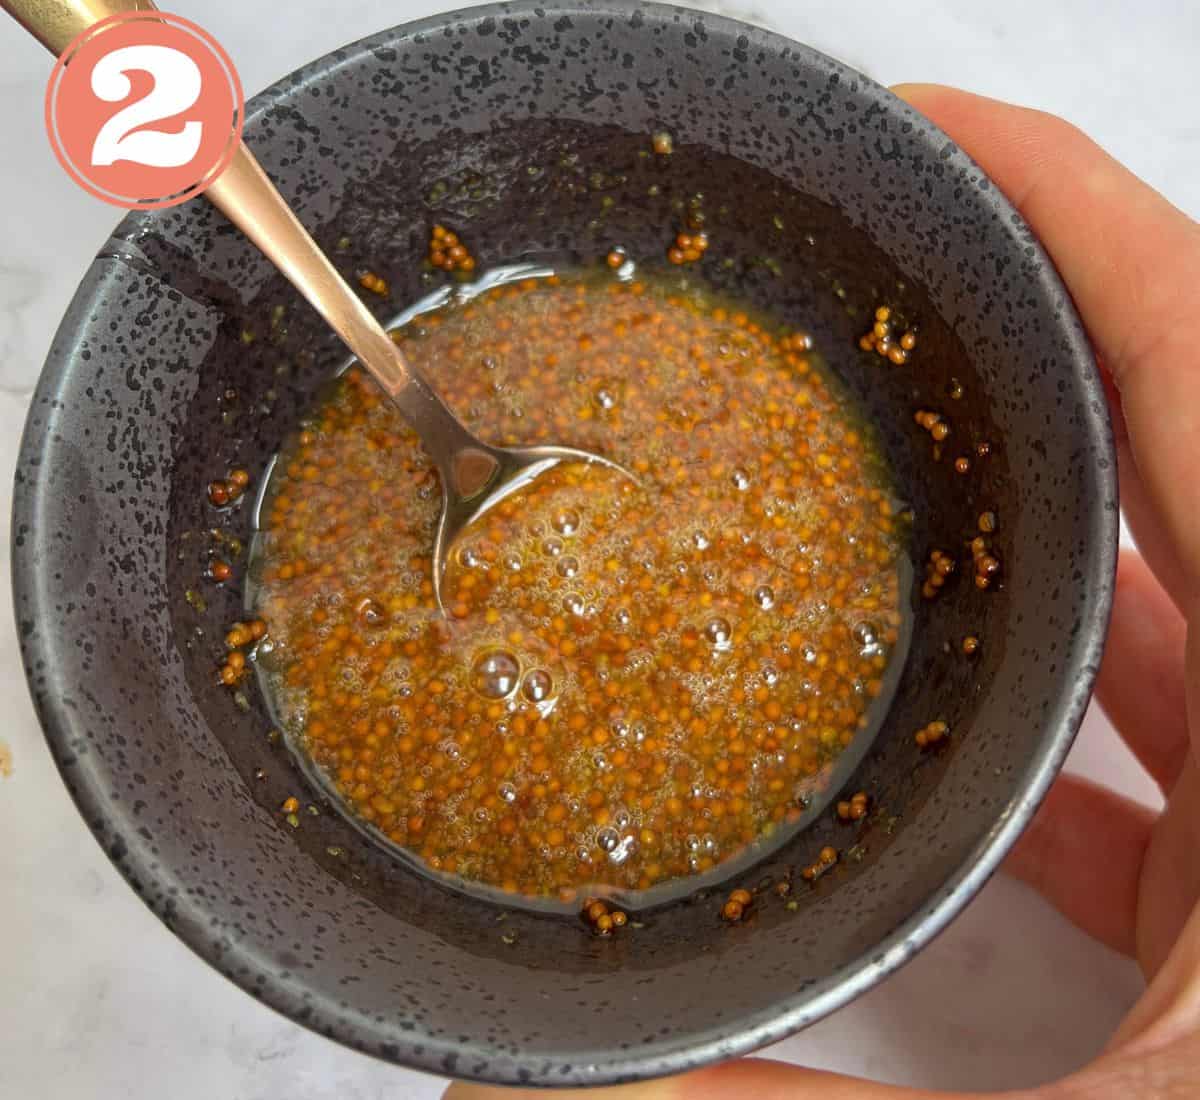 Honey and mustard marinade in a black bowl with a spoon in it.